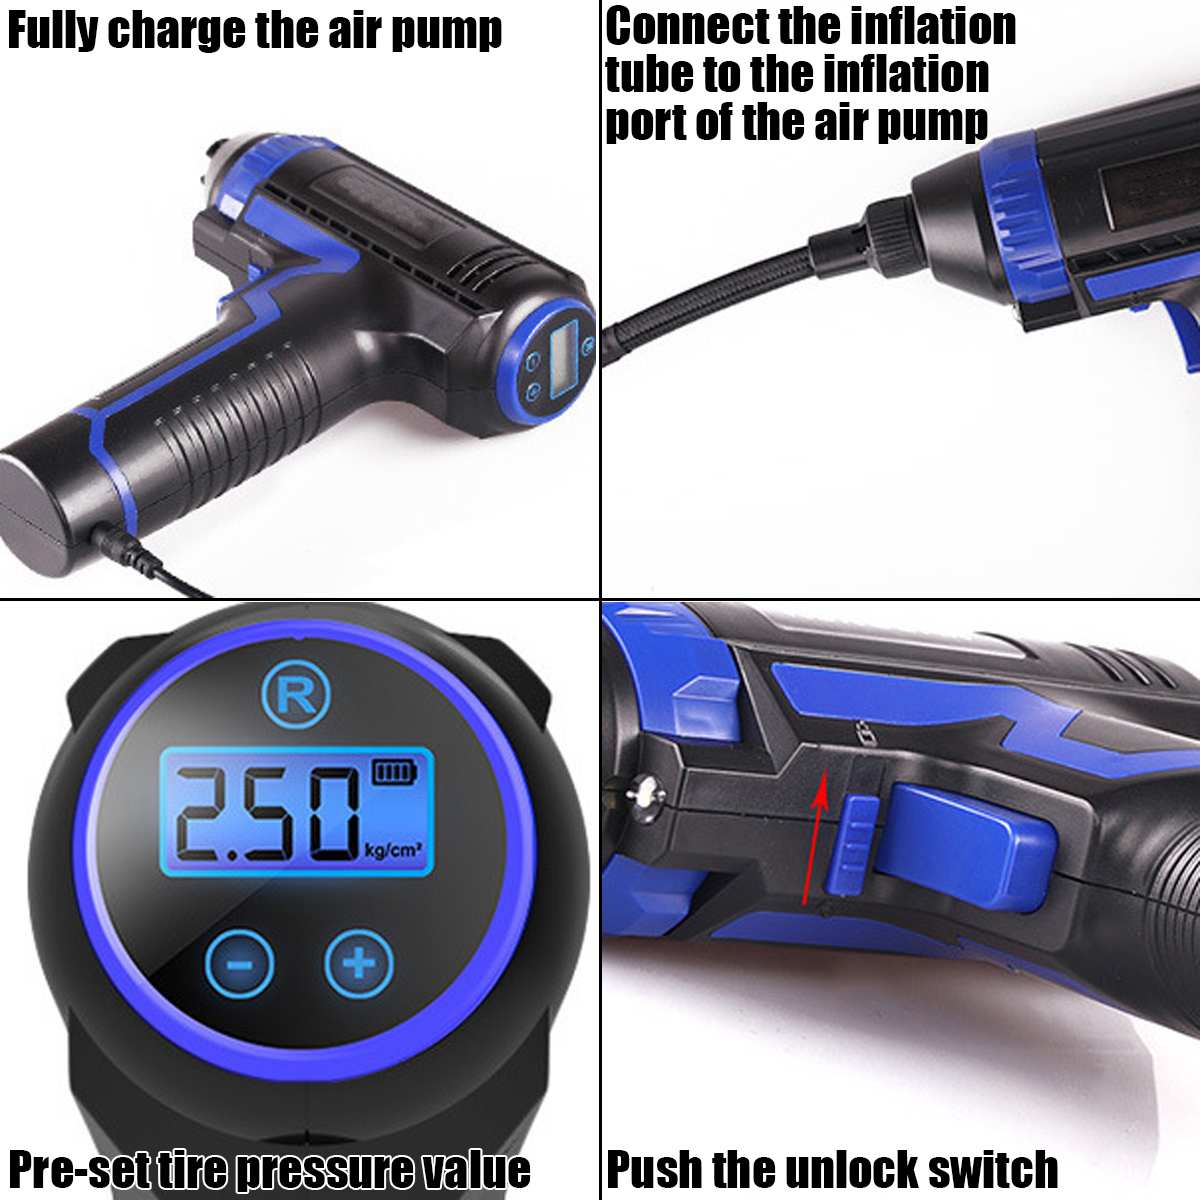 Wireless Charging Portable Multi-function Vehicle Household Pump Electric Car Tire Air Pump